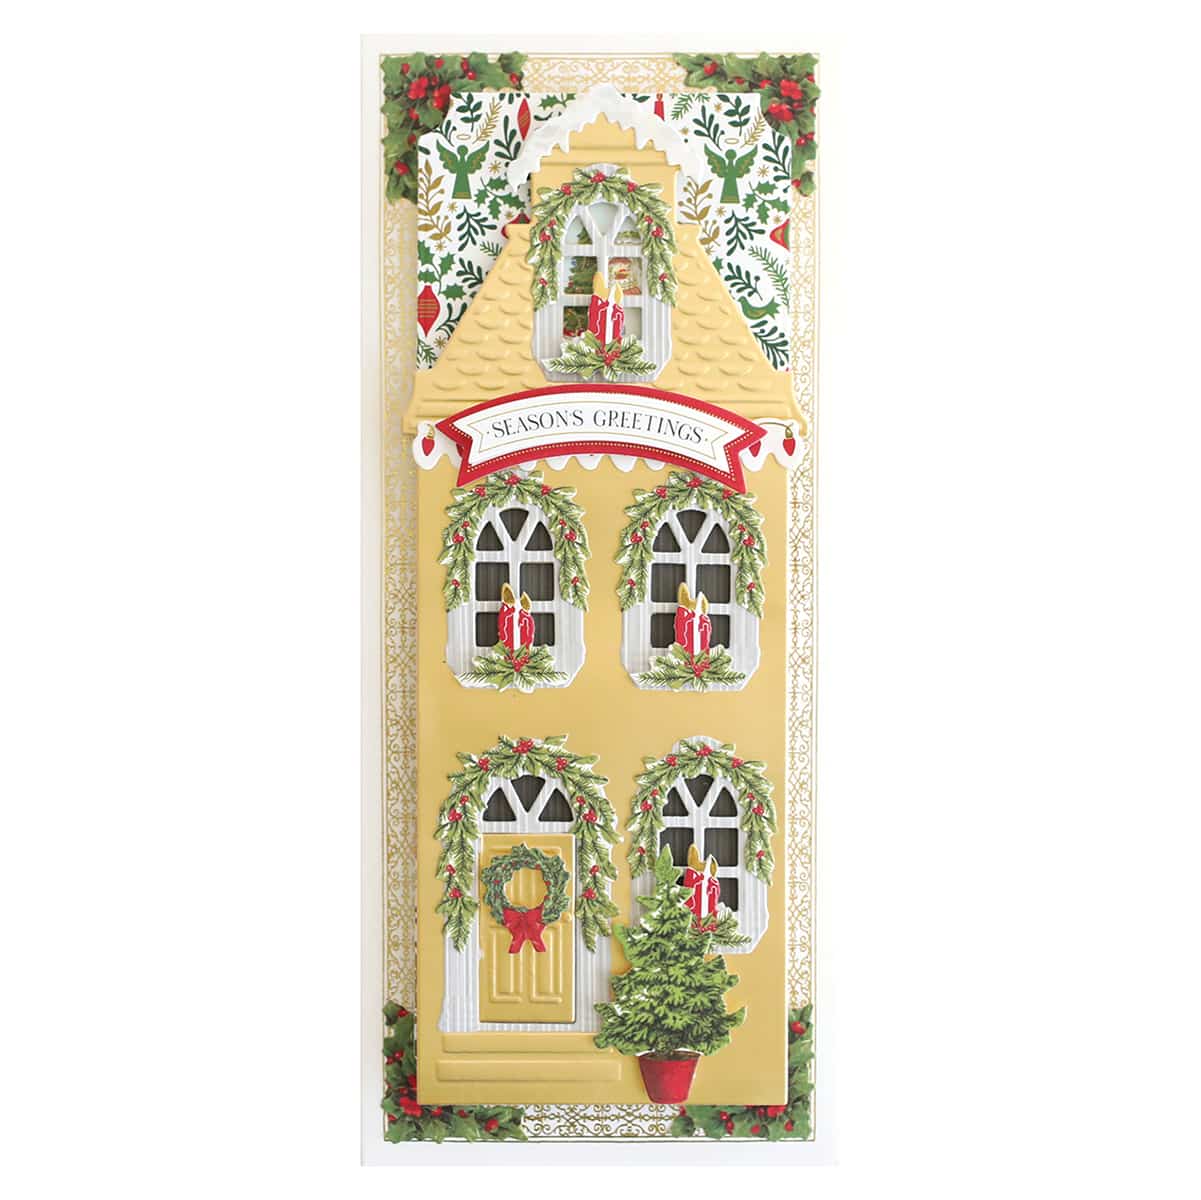 a christmas card with a yellow house and wreaths.